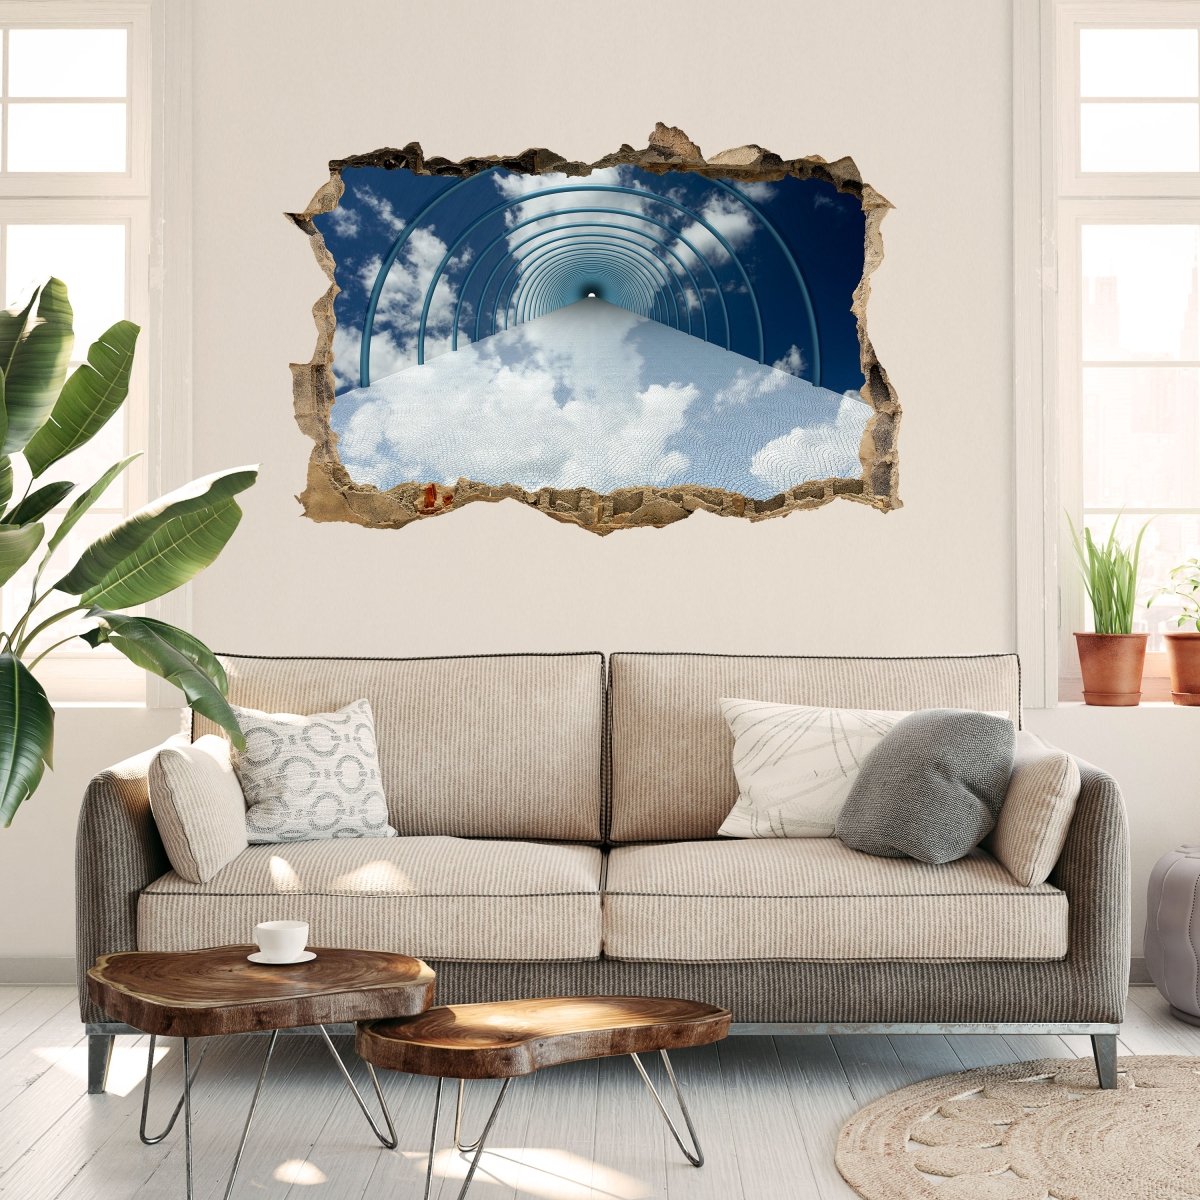 3D wall sticker tunnel in clouds - Wall Decal M0784